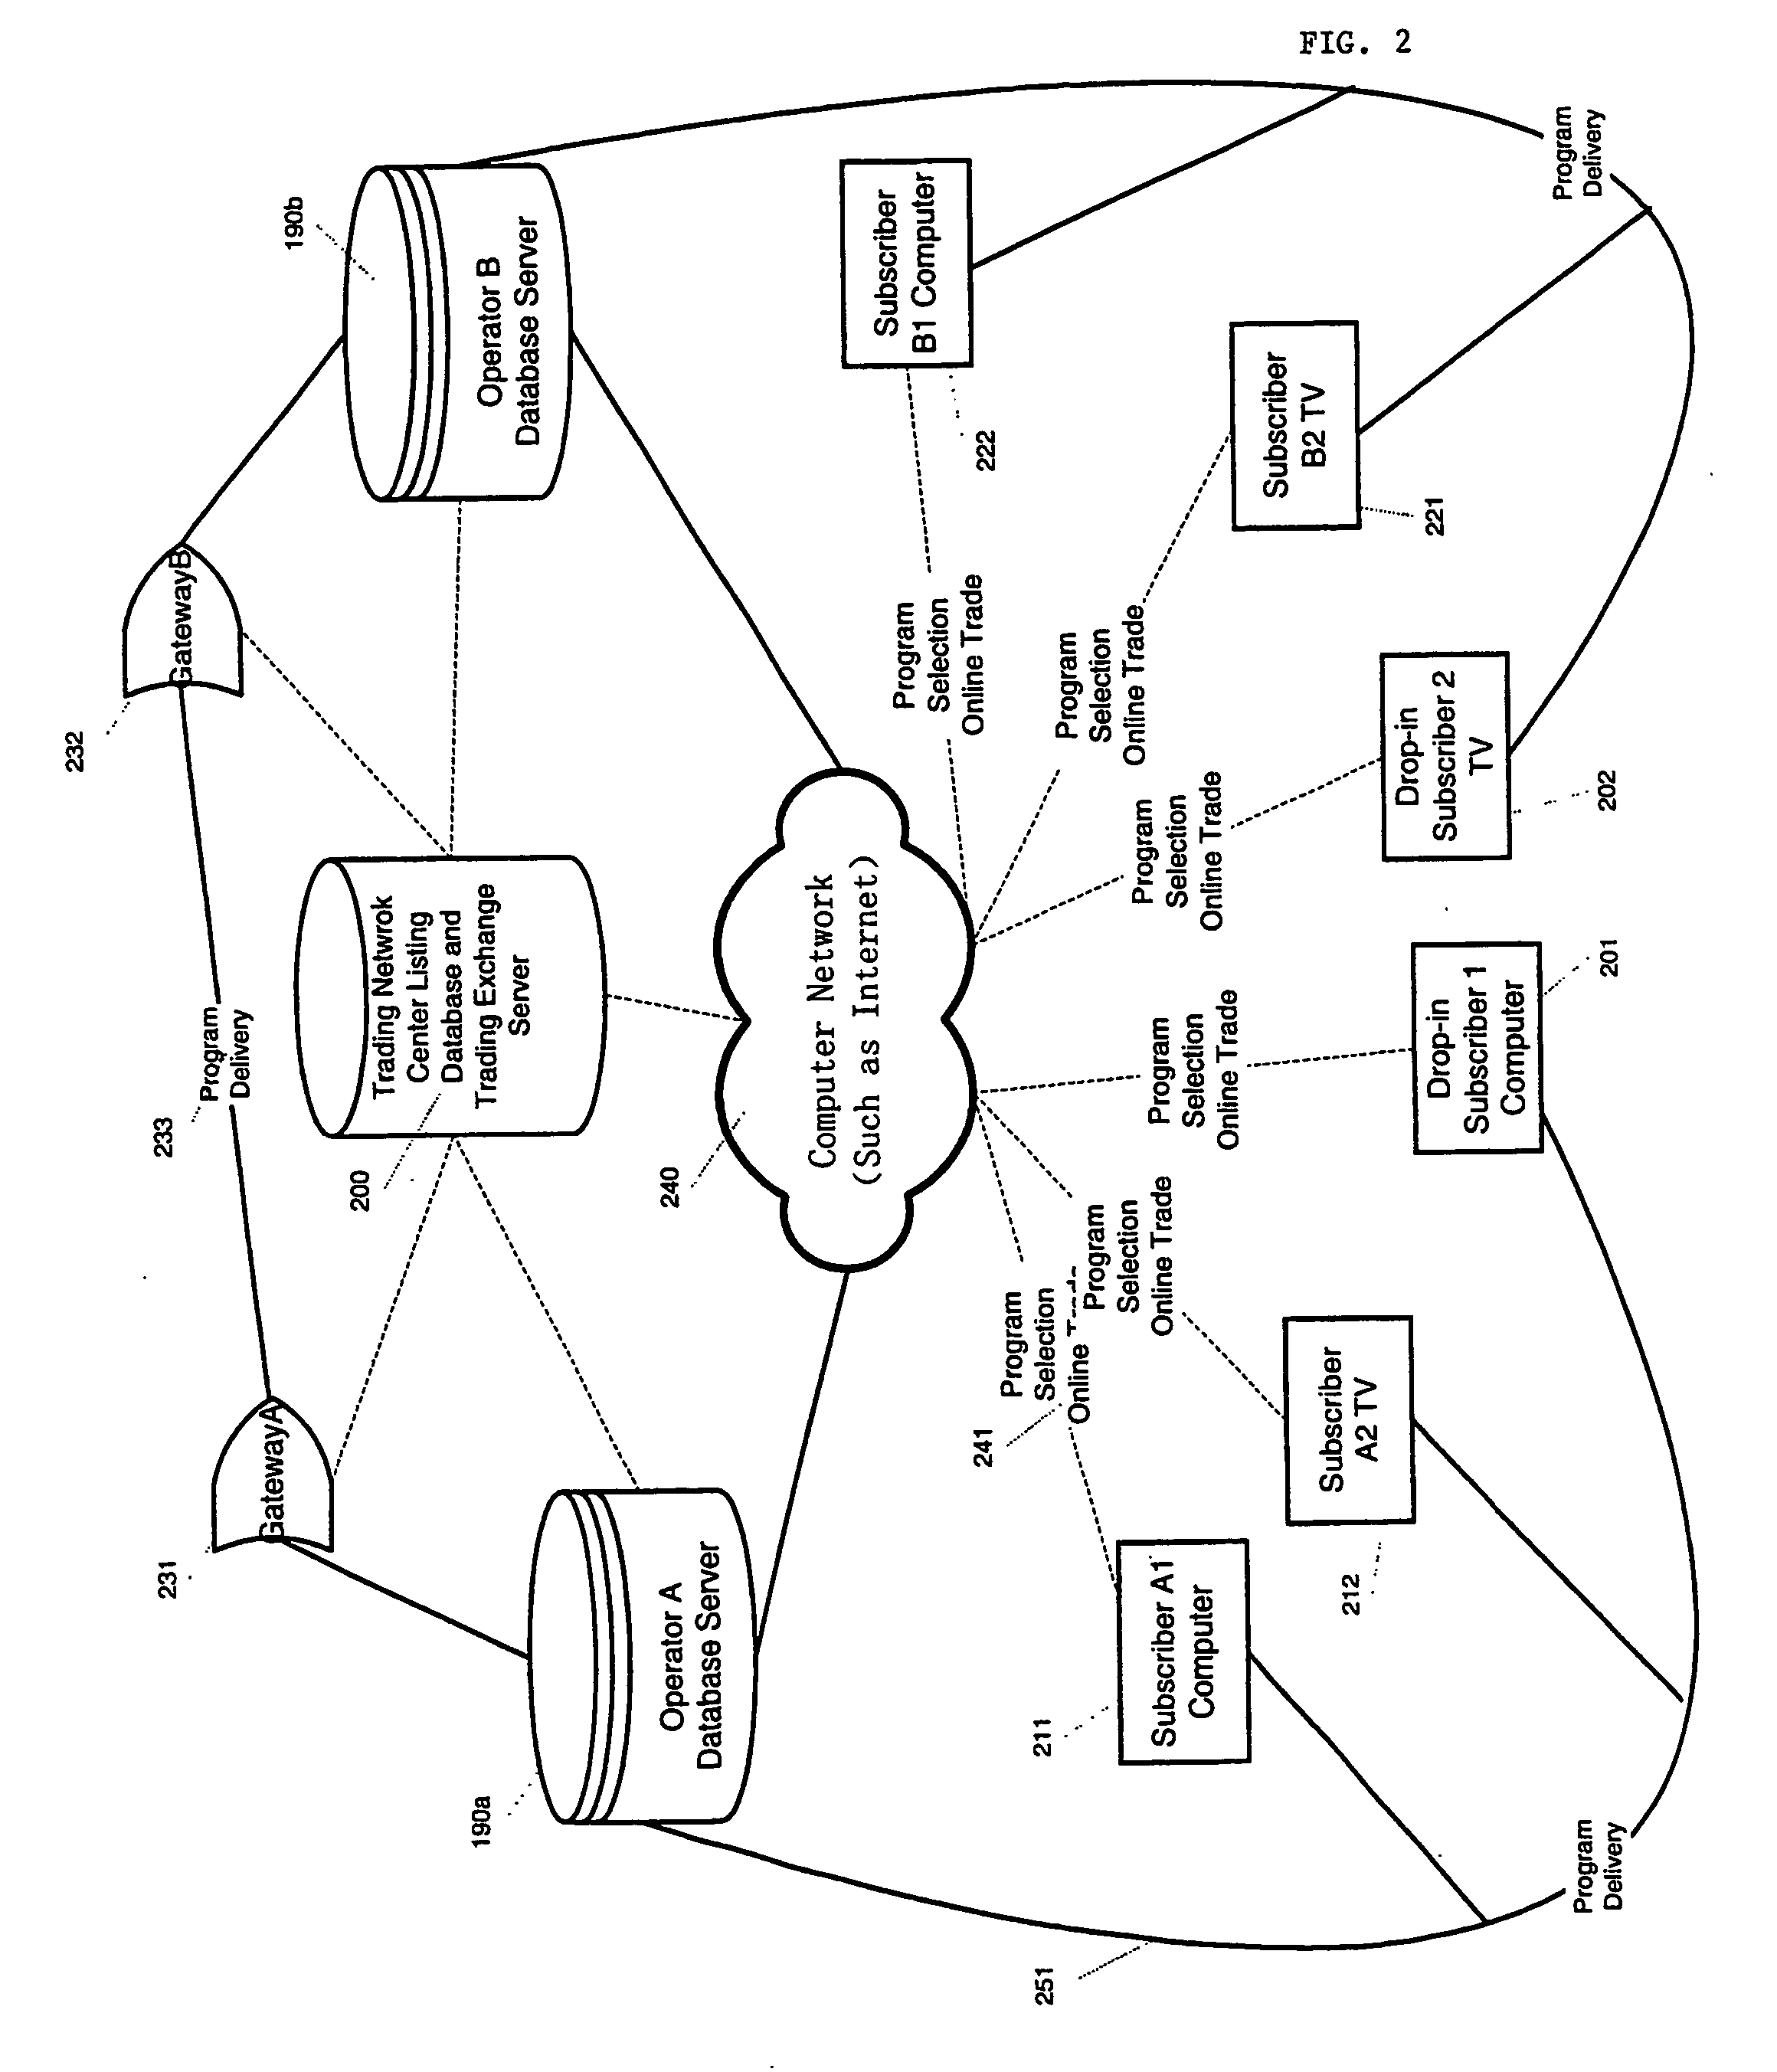 Electronic information item selection for trade and traded item control delivery system